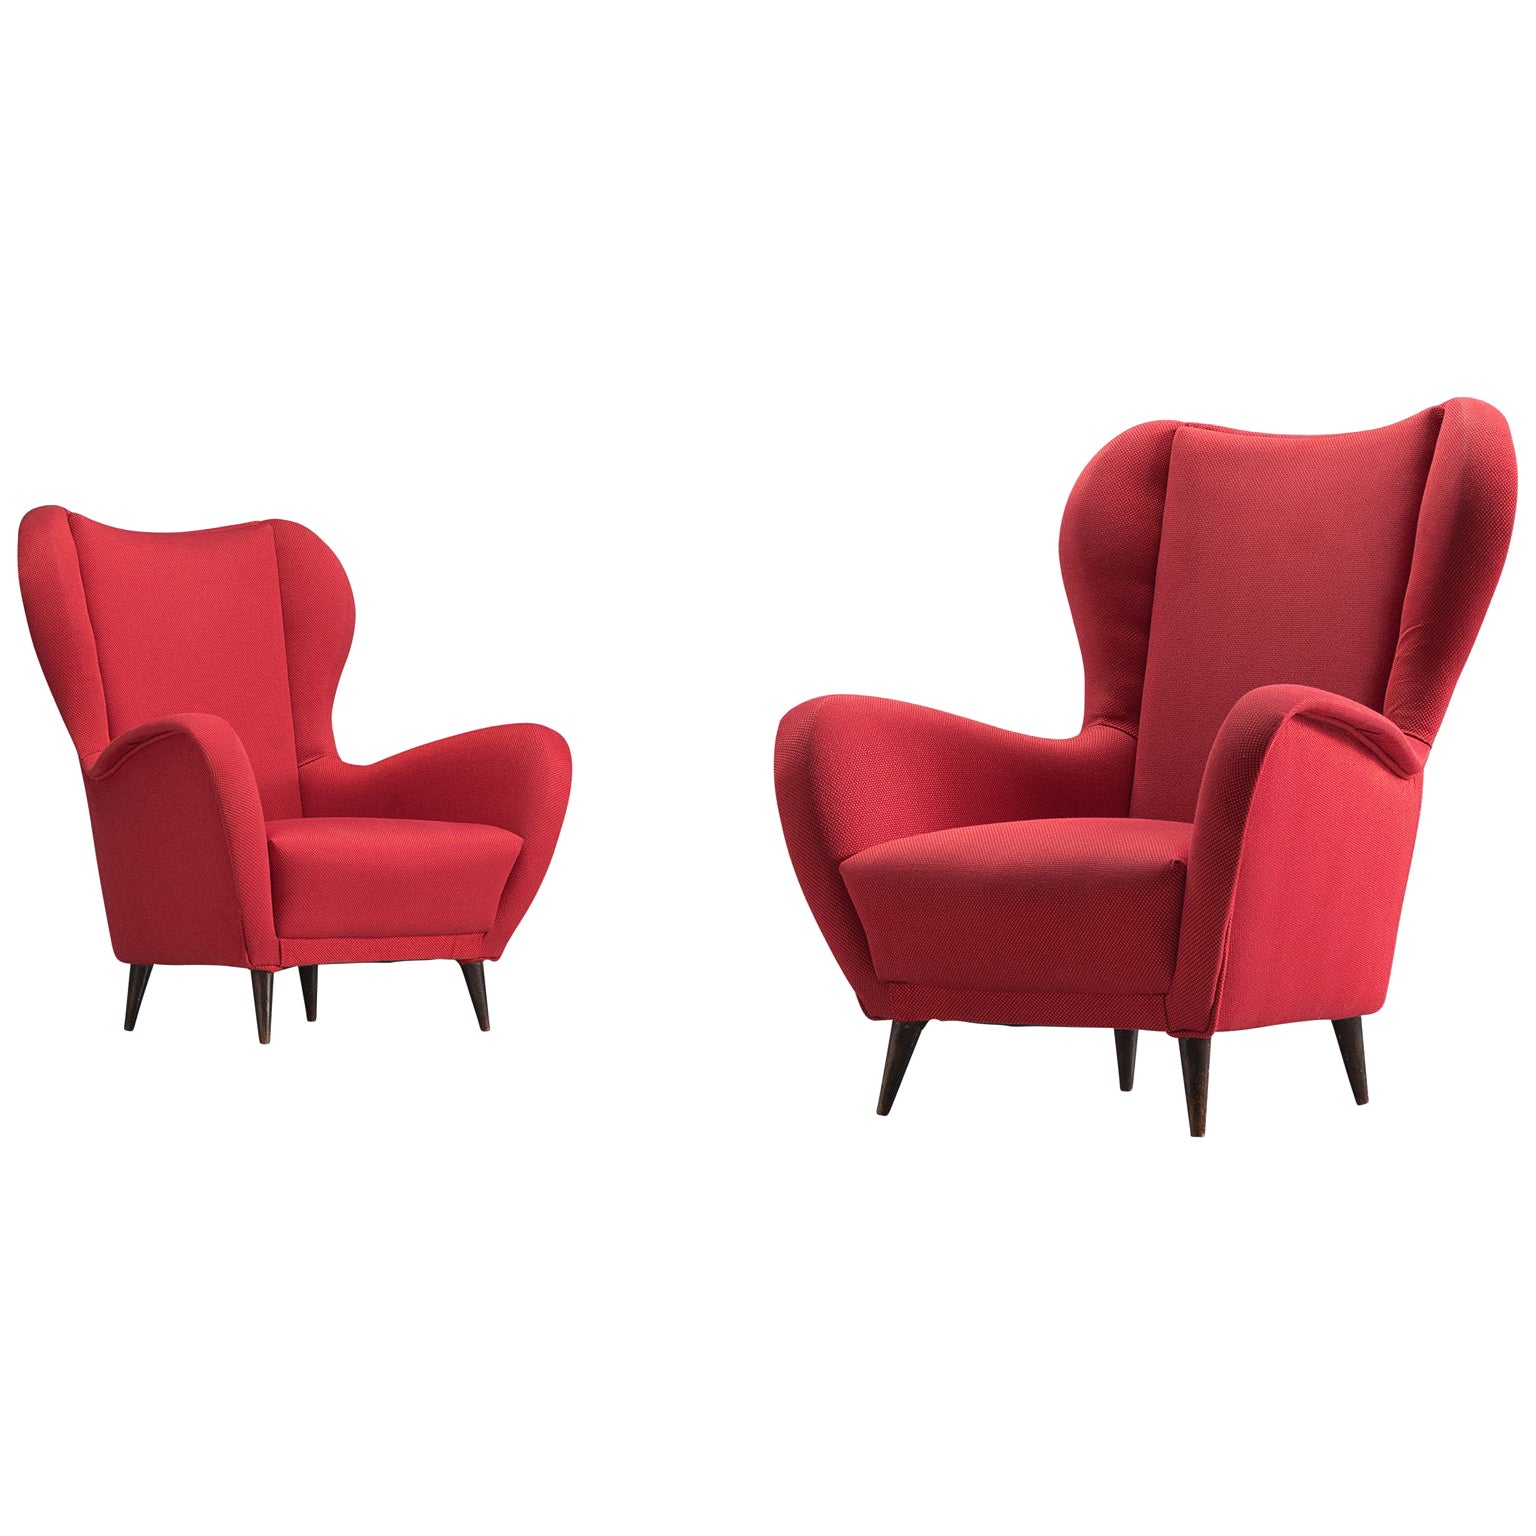 Italian Club Chairs in Red Upholstery